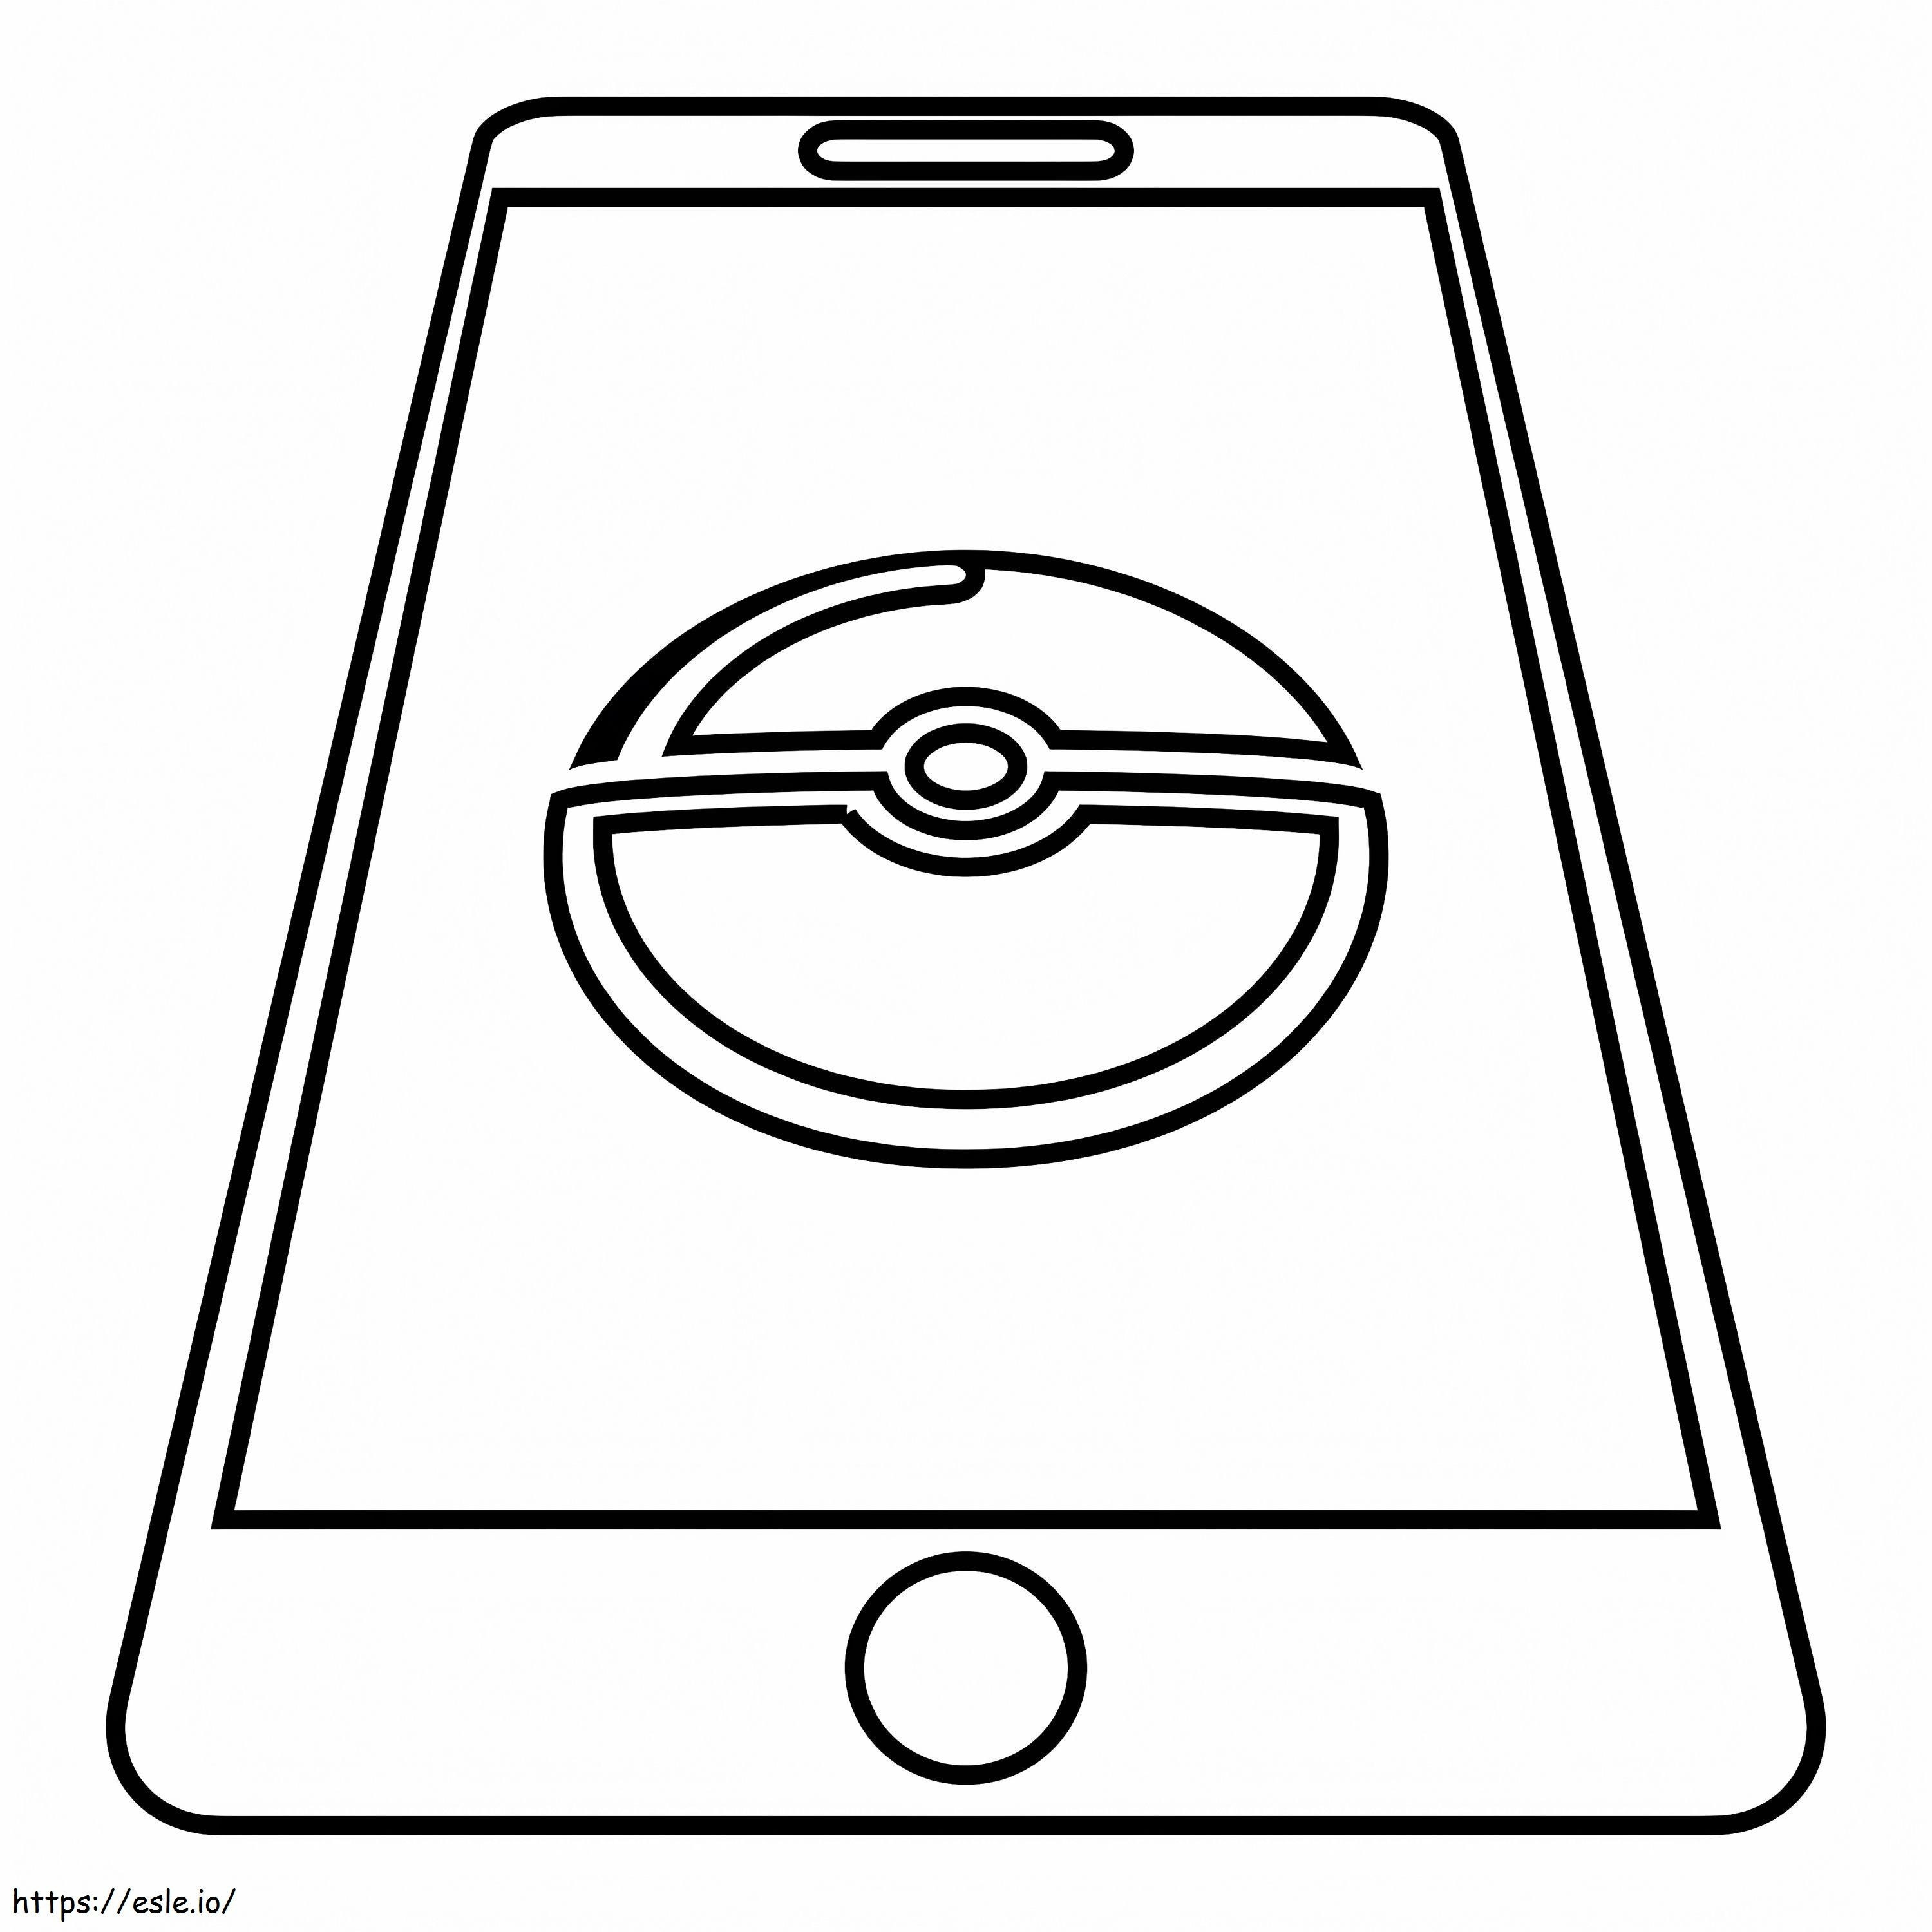 Pokeball On Smartphone coloring page